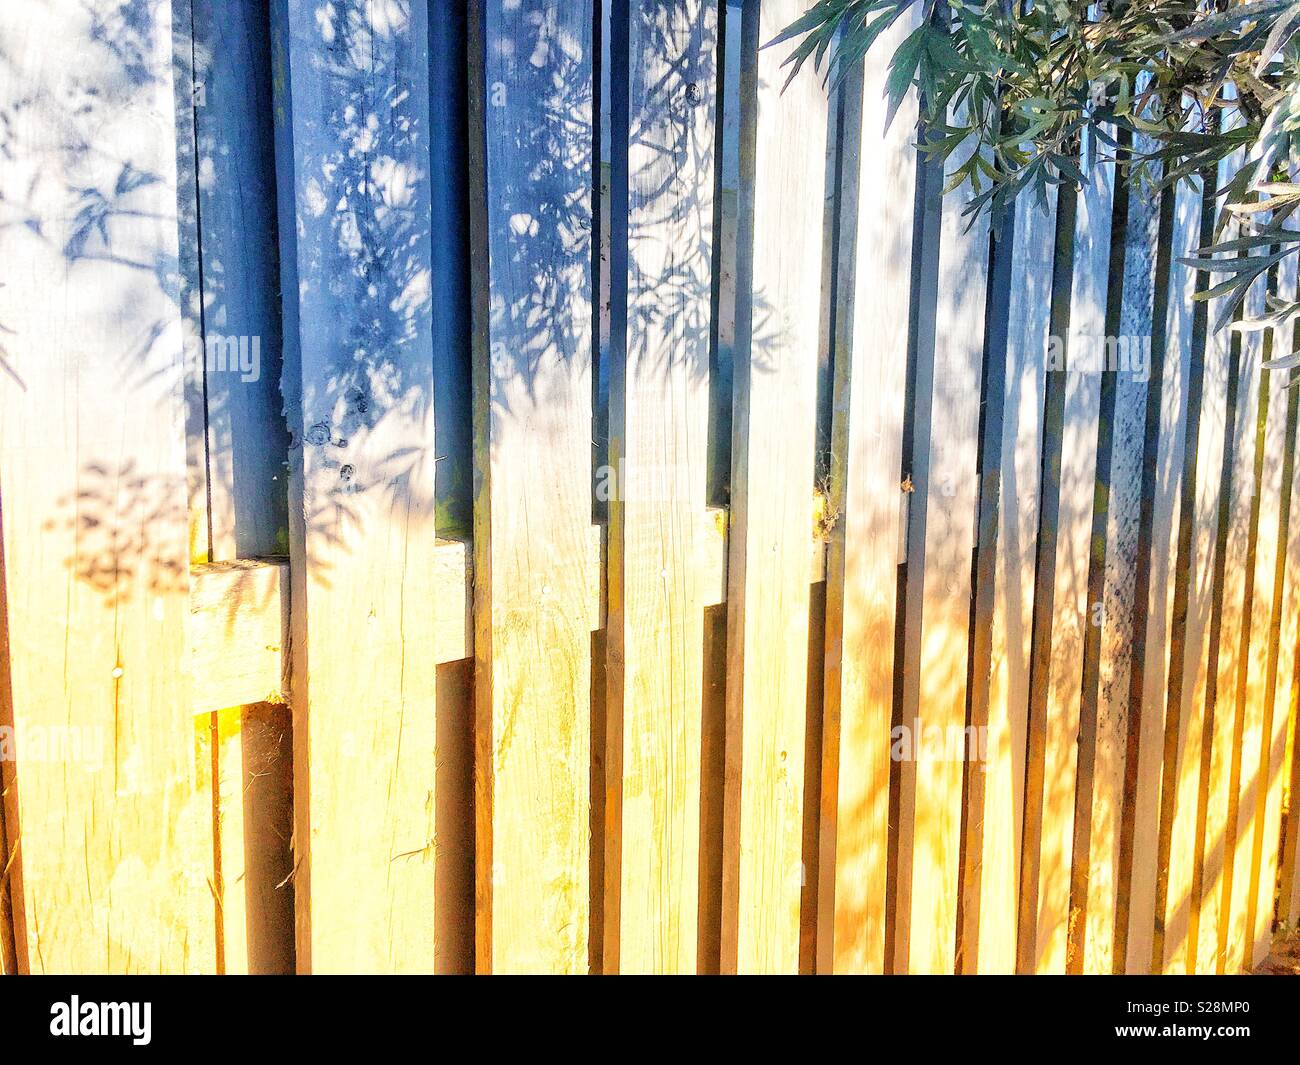 Fence shadows from a tree and tree leaves Stock Photo